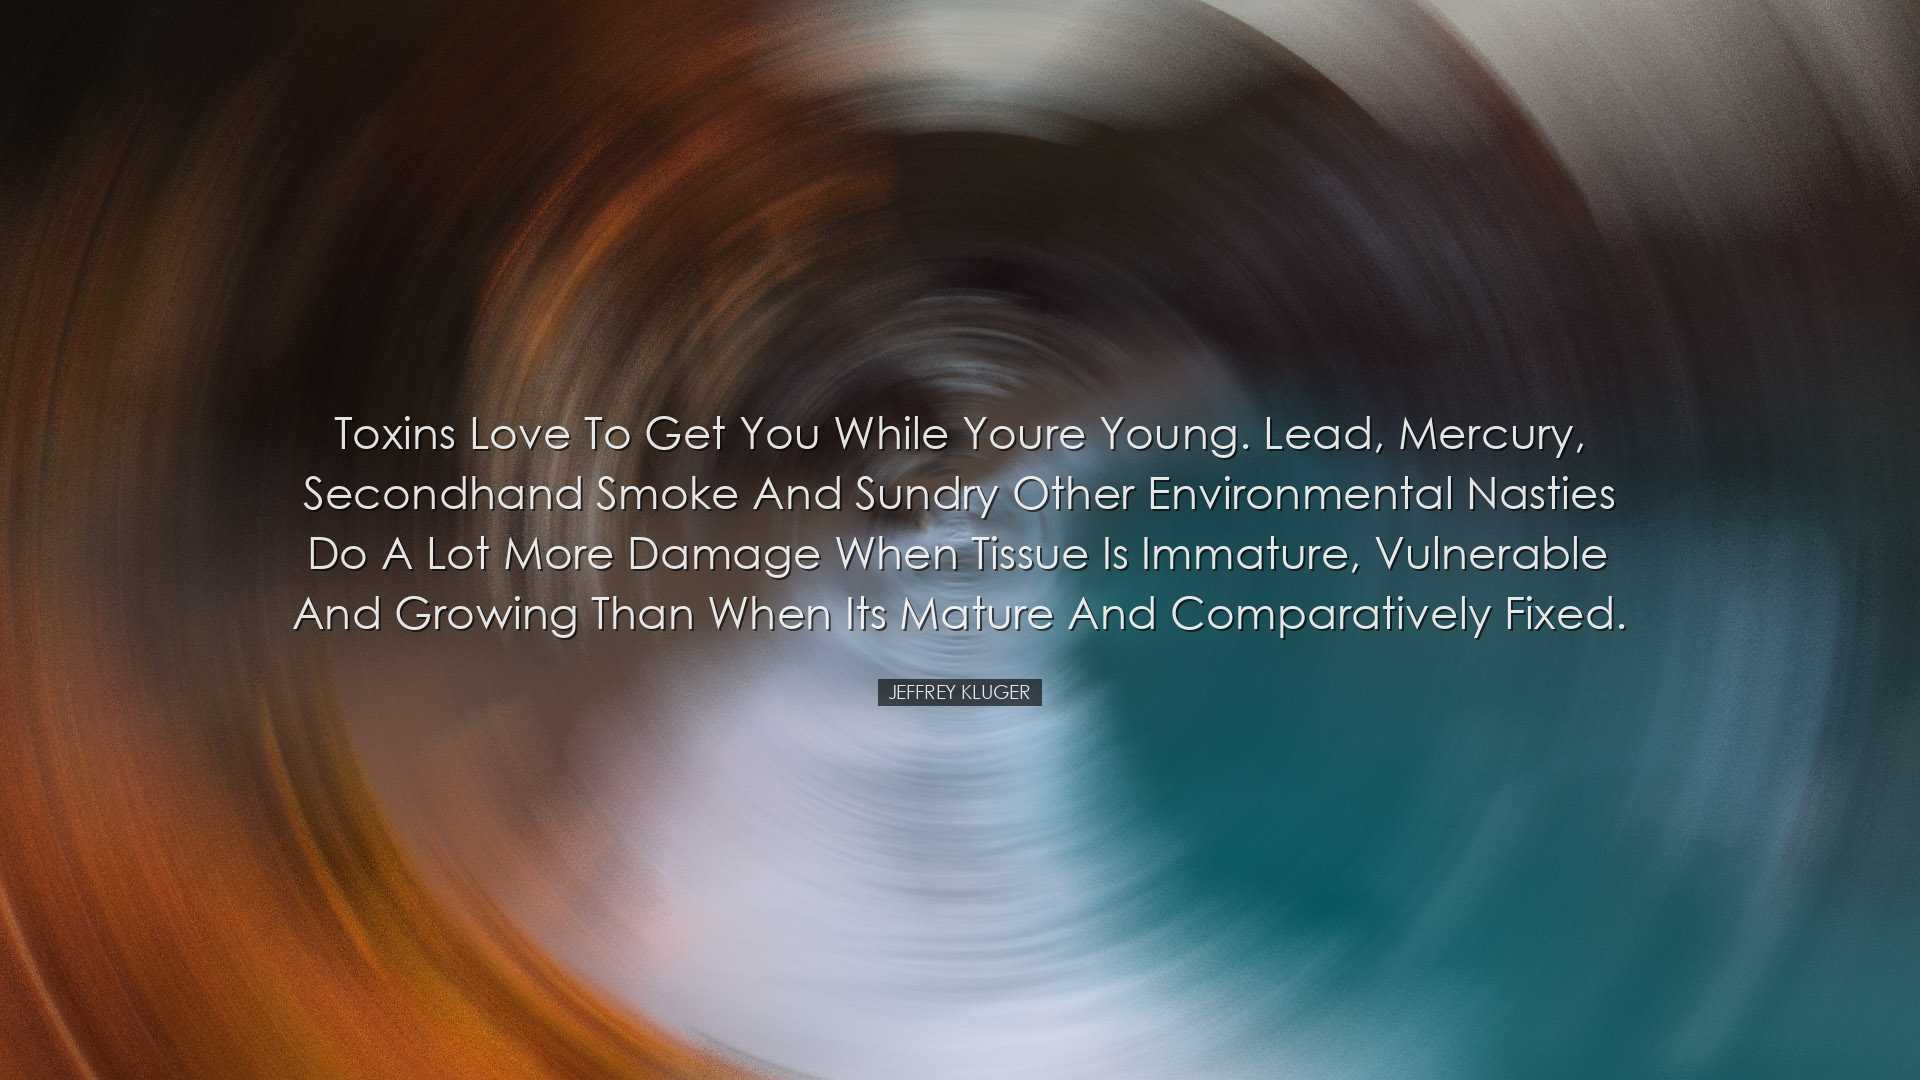 Toxins love to get you while youre young. Lead, mercury, secondhan